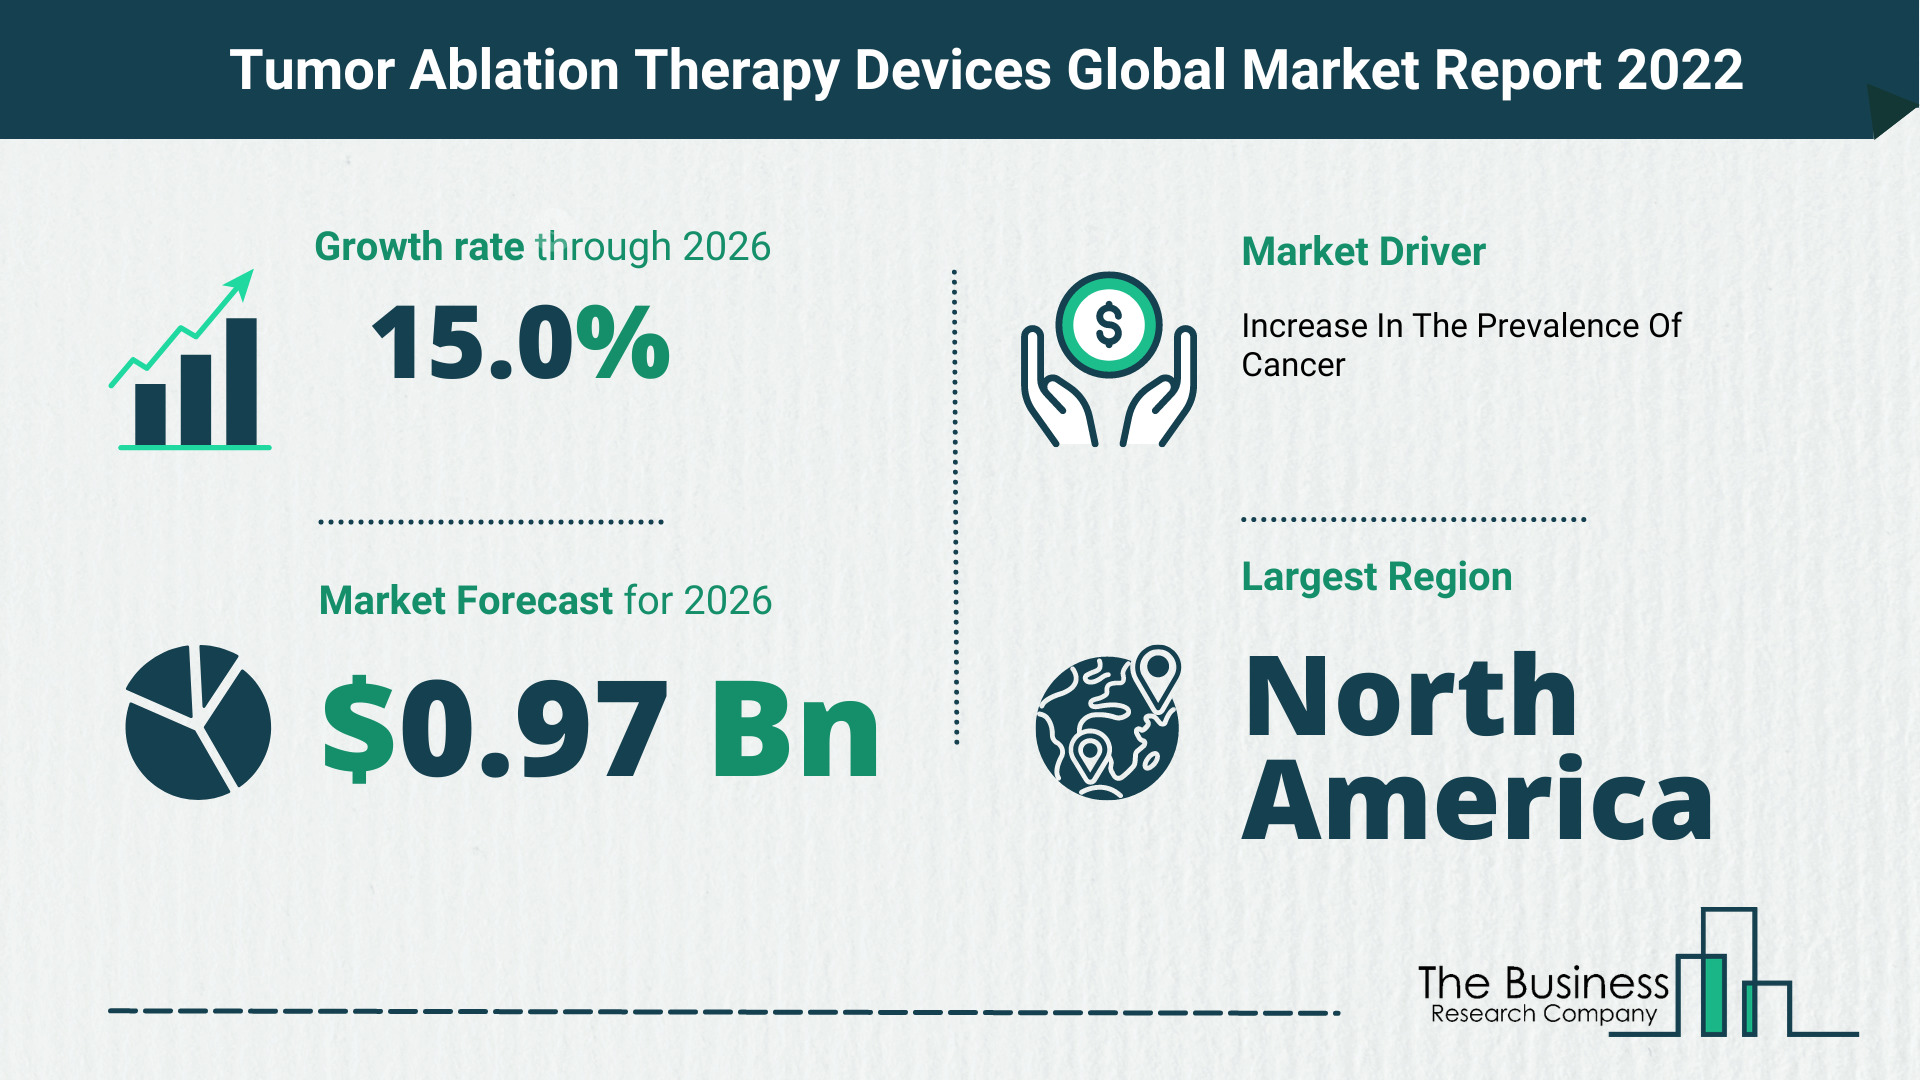 Global Tumor Ablation Therapy Devices Market 2022 – Market Opportunities And Strategies